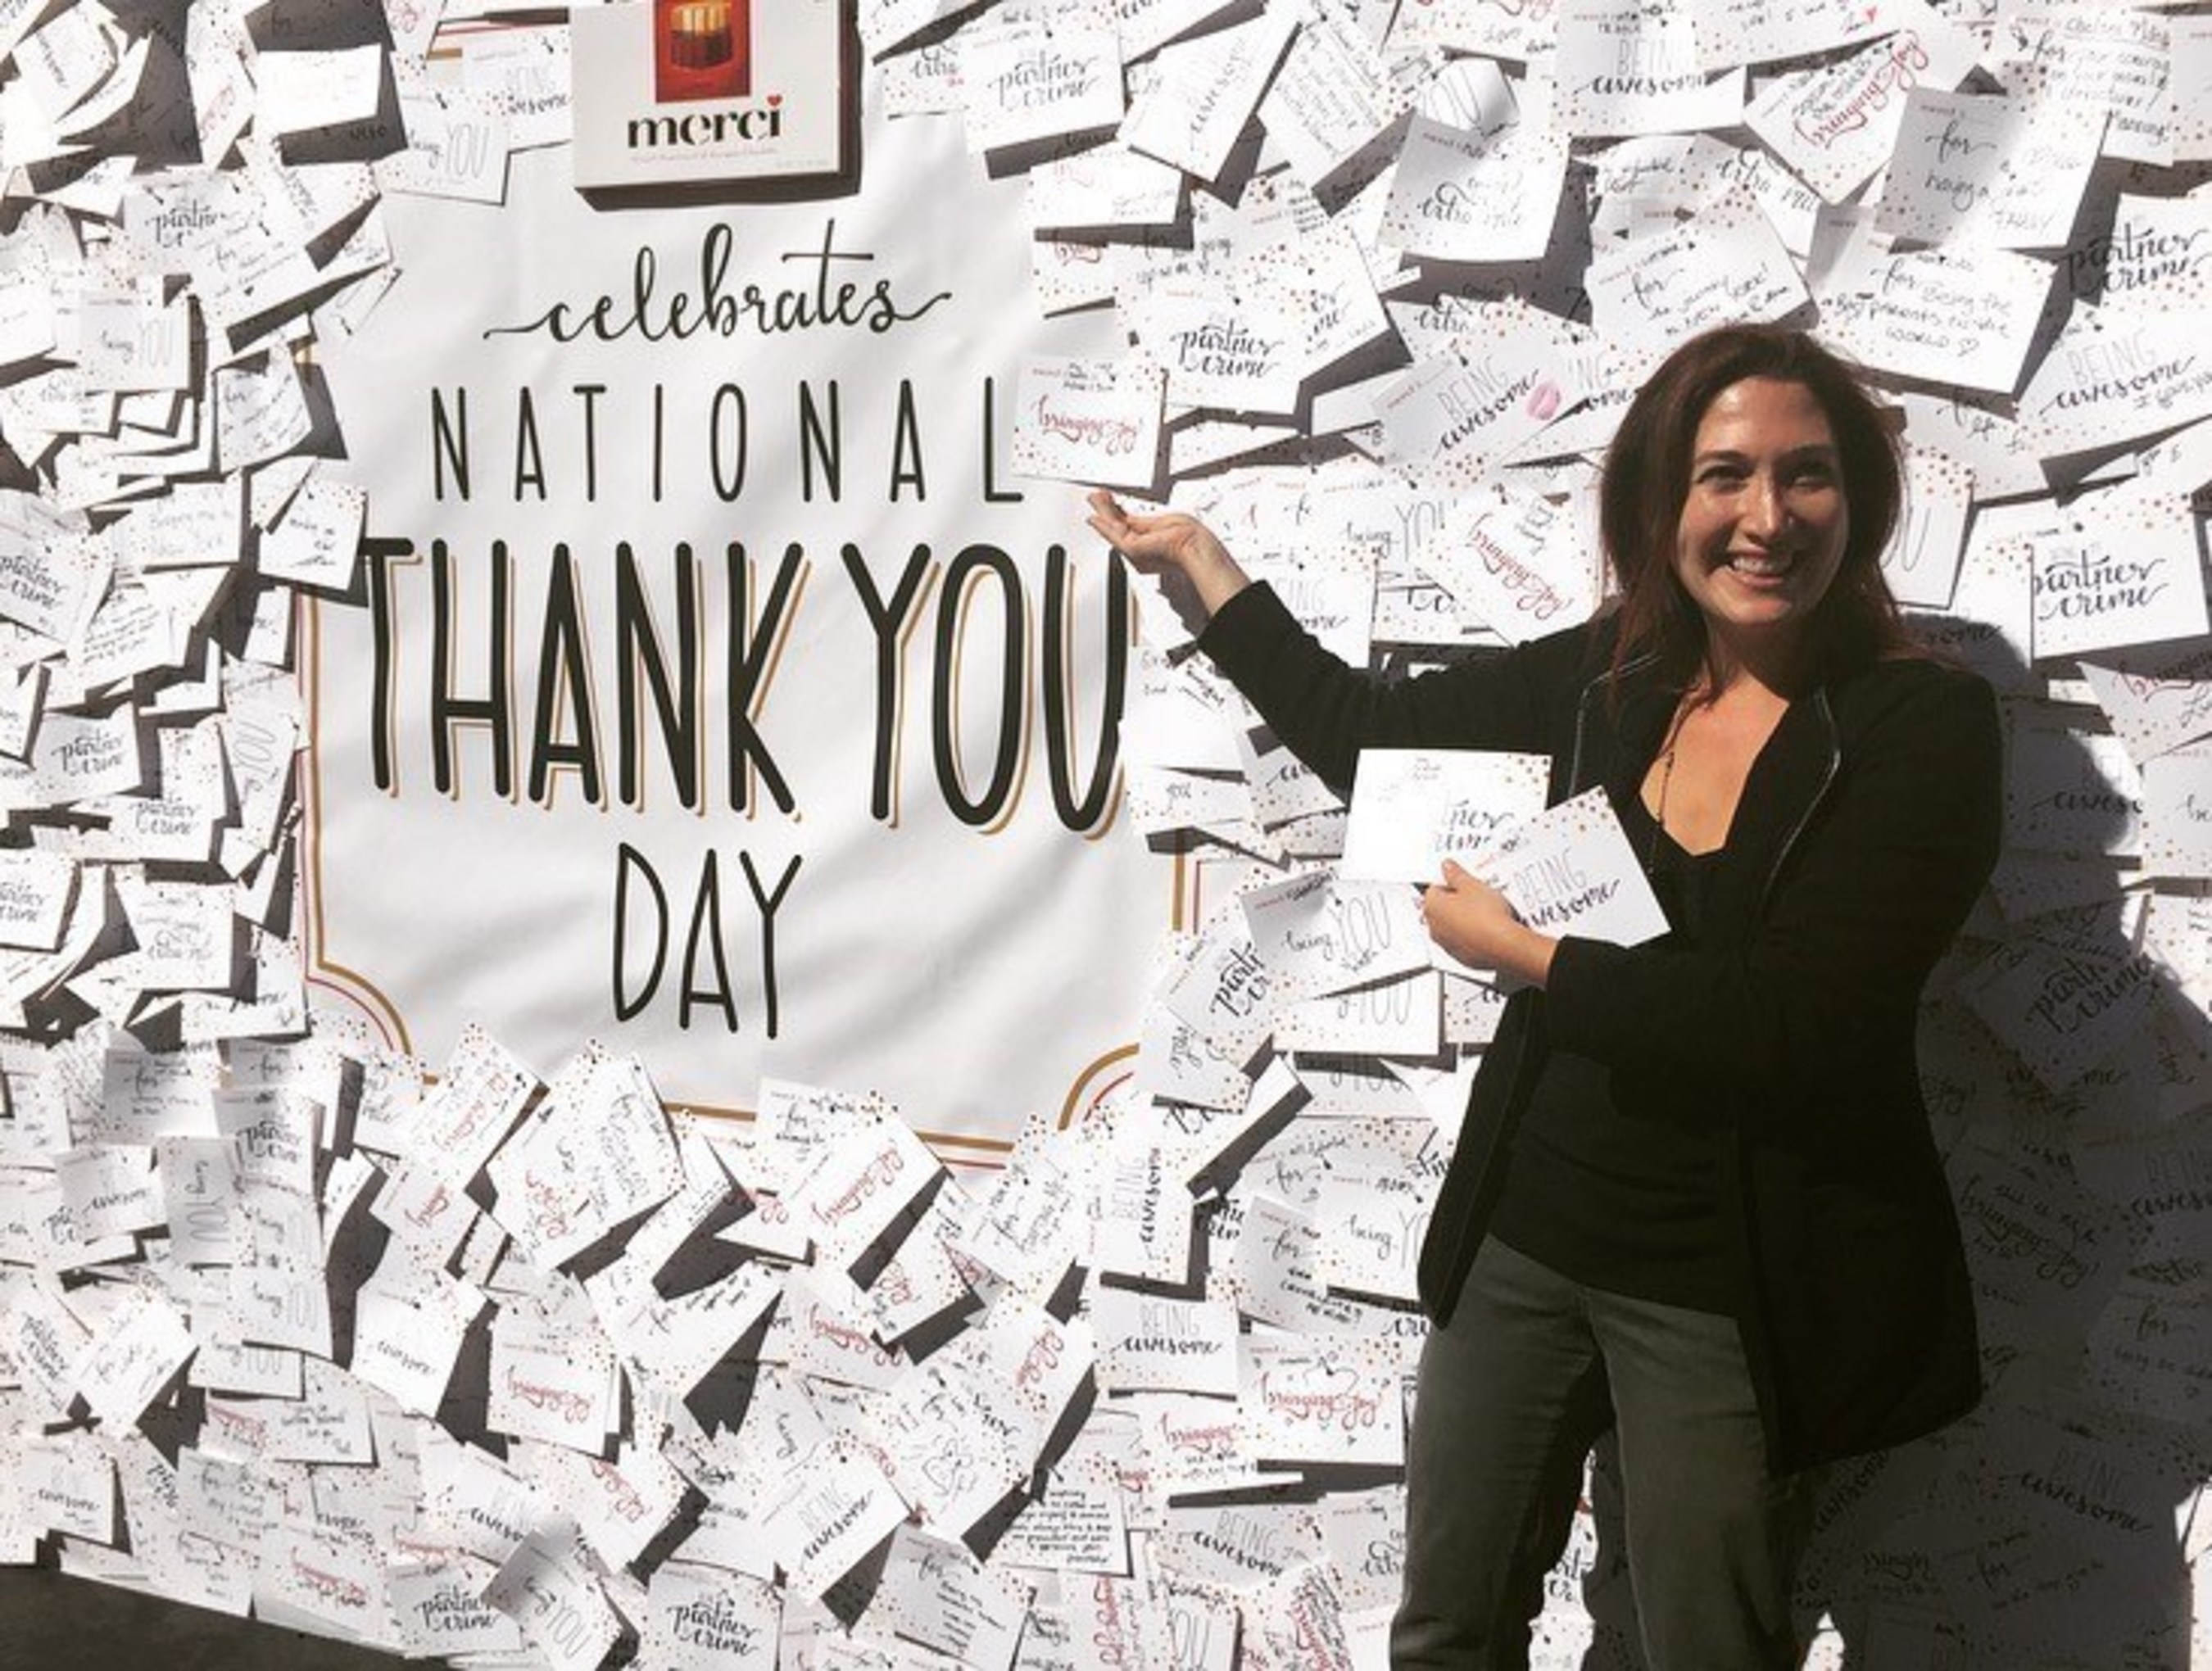 New York native, Randi Zuckerberg writes thank you note to sons, Asher and Simi to express gratitude on National Thank You Day with merci Chocolates.